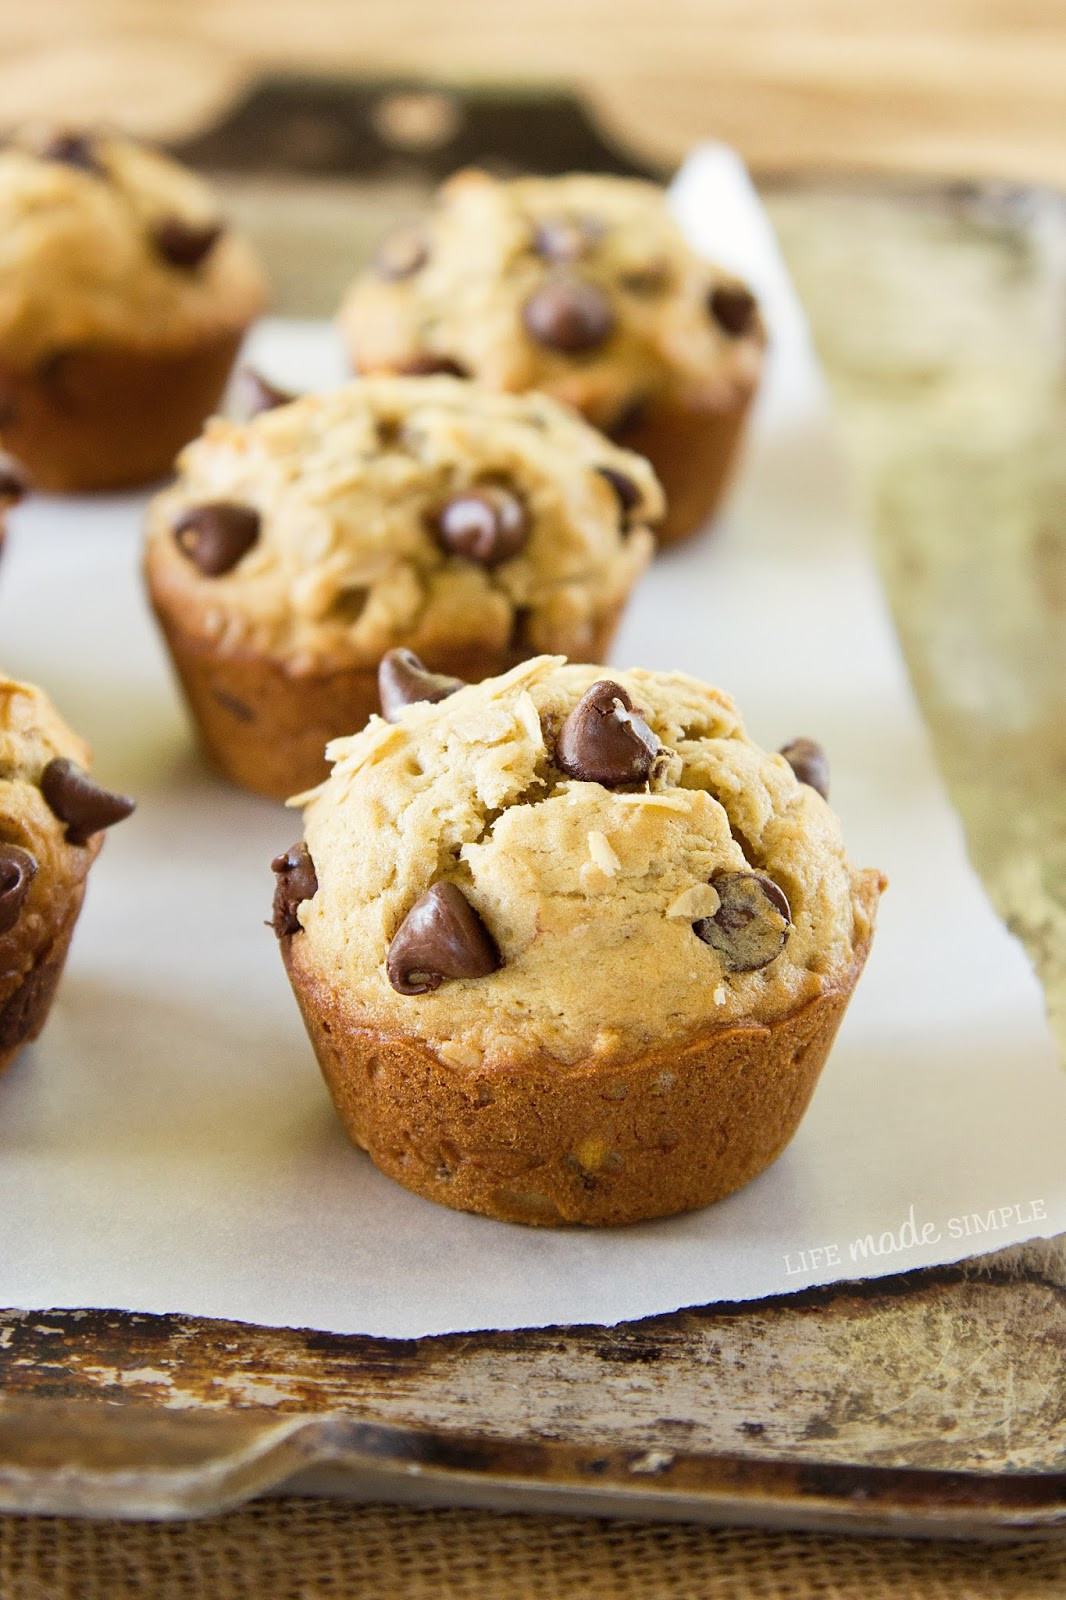 Oatmeal Chocolate Chip Muffins
 Oatmeal Chocolate Chip Banana Muffins Life Made Simple